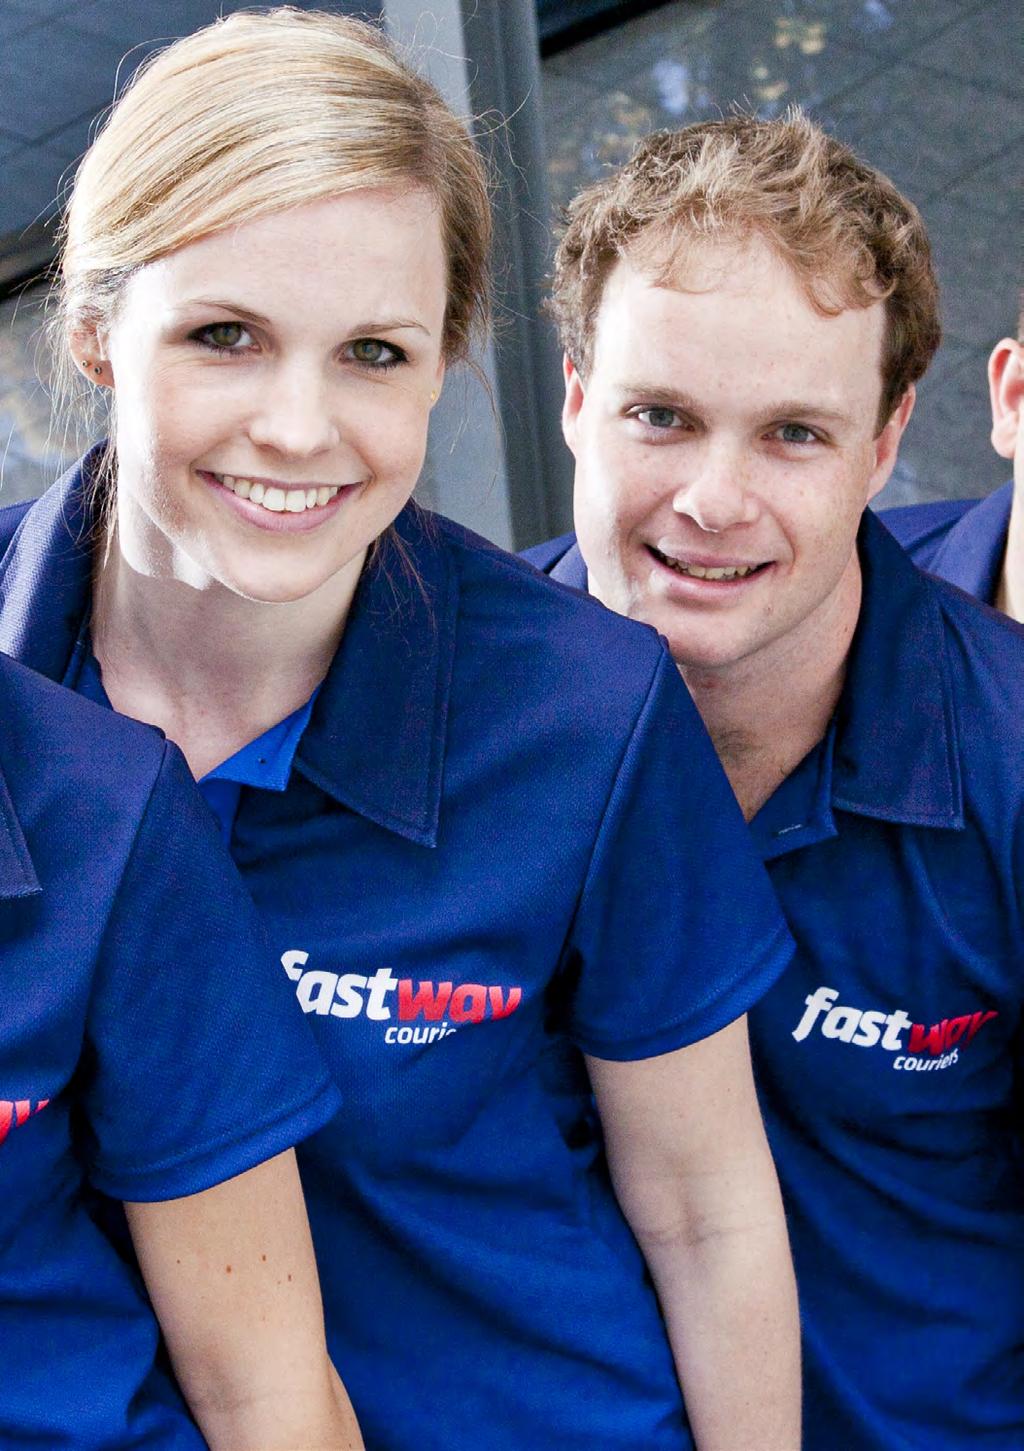 Our Franchise Structure Fastway Couriers is proud to be able to give men and women from all walks of life the opportunity to own and run their own successful business.